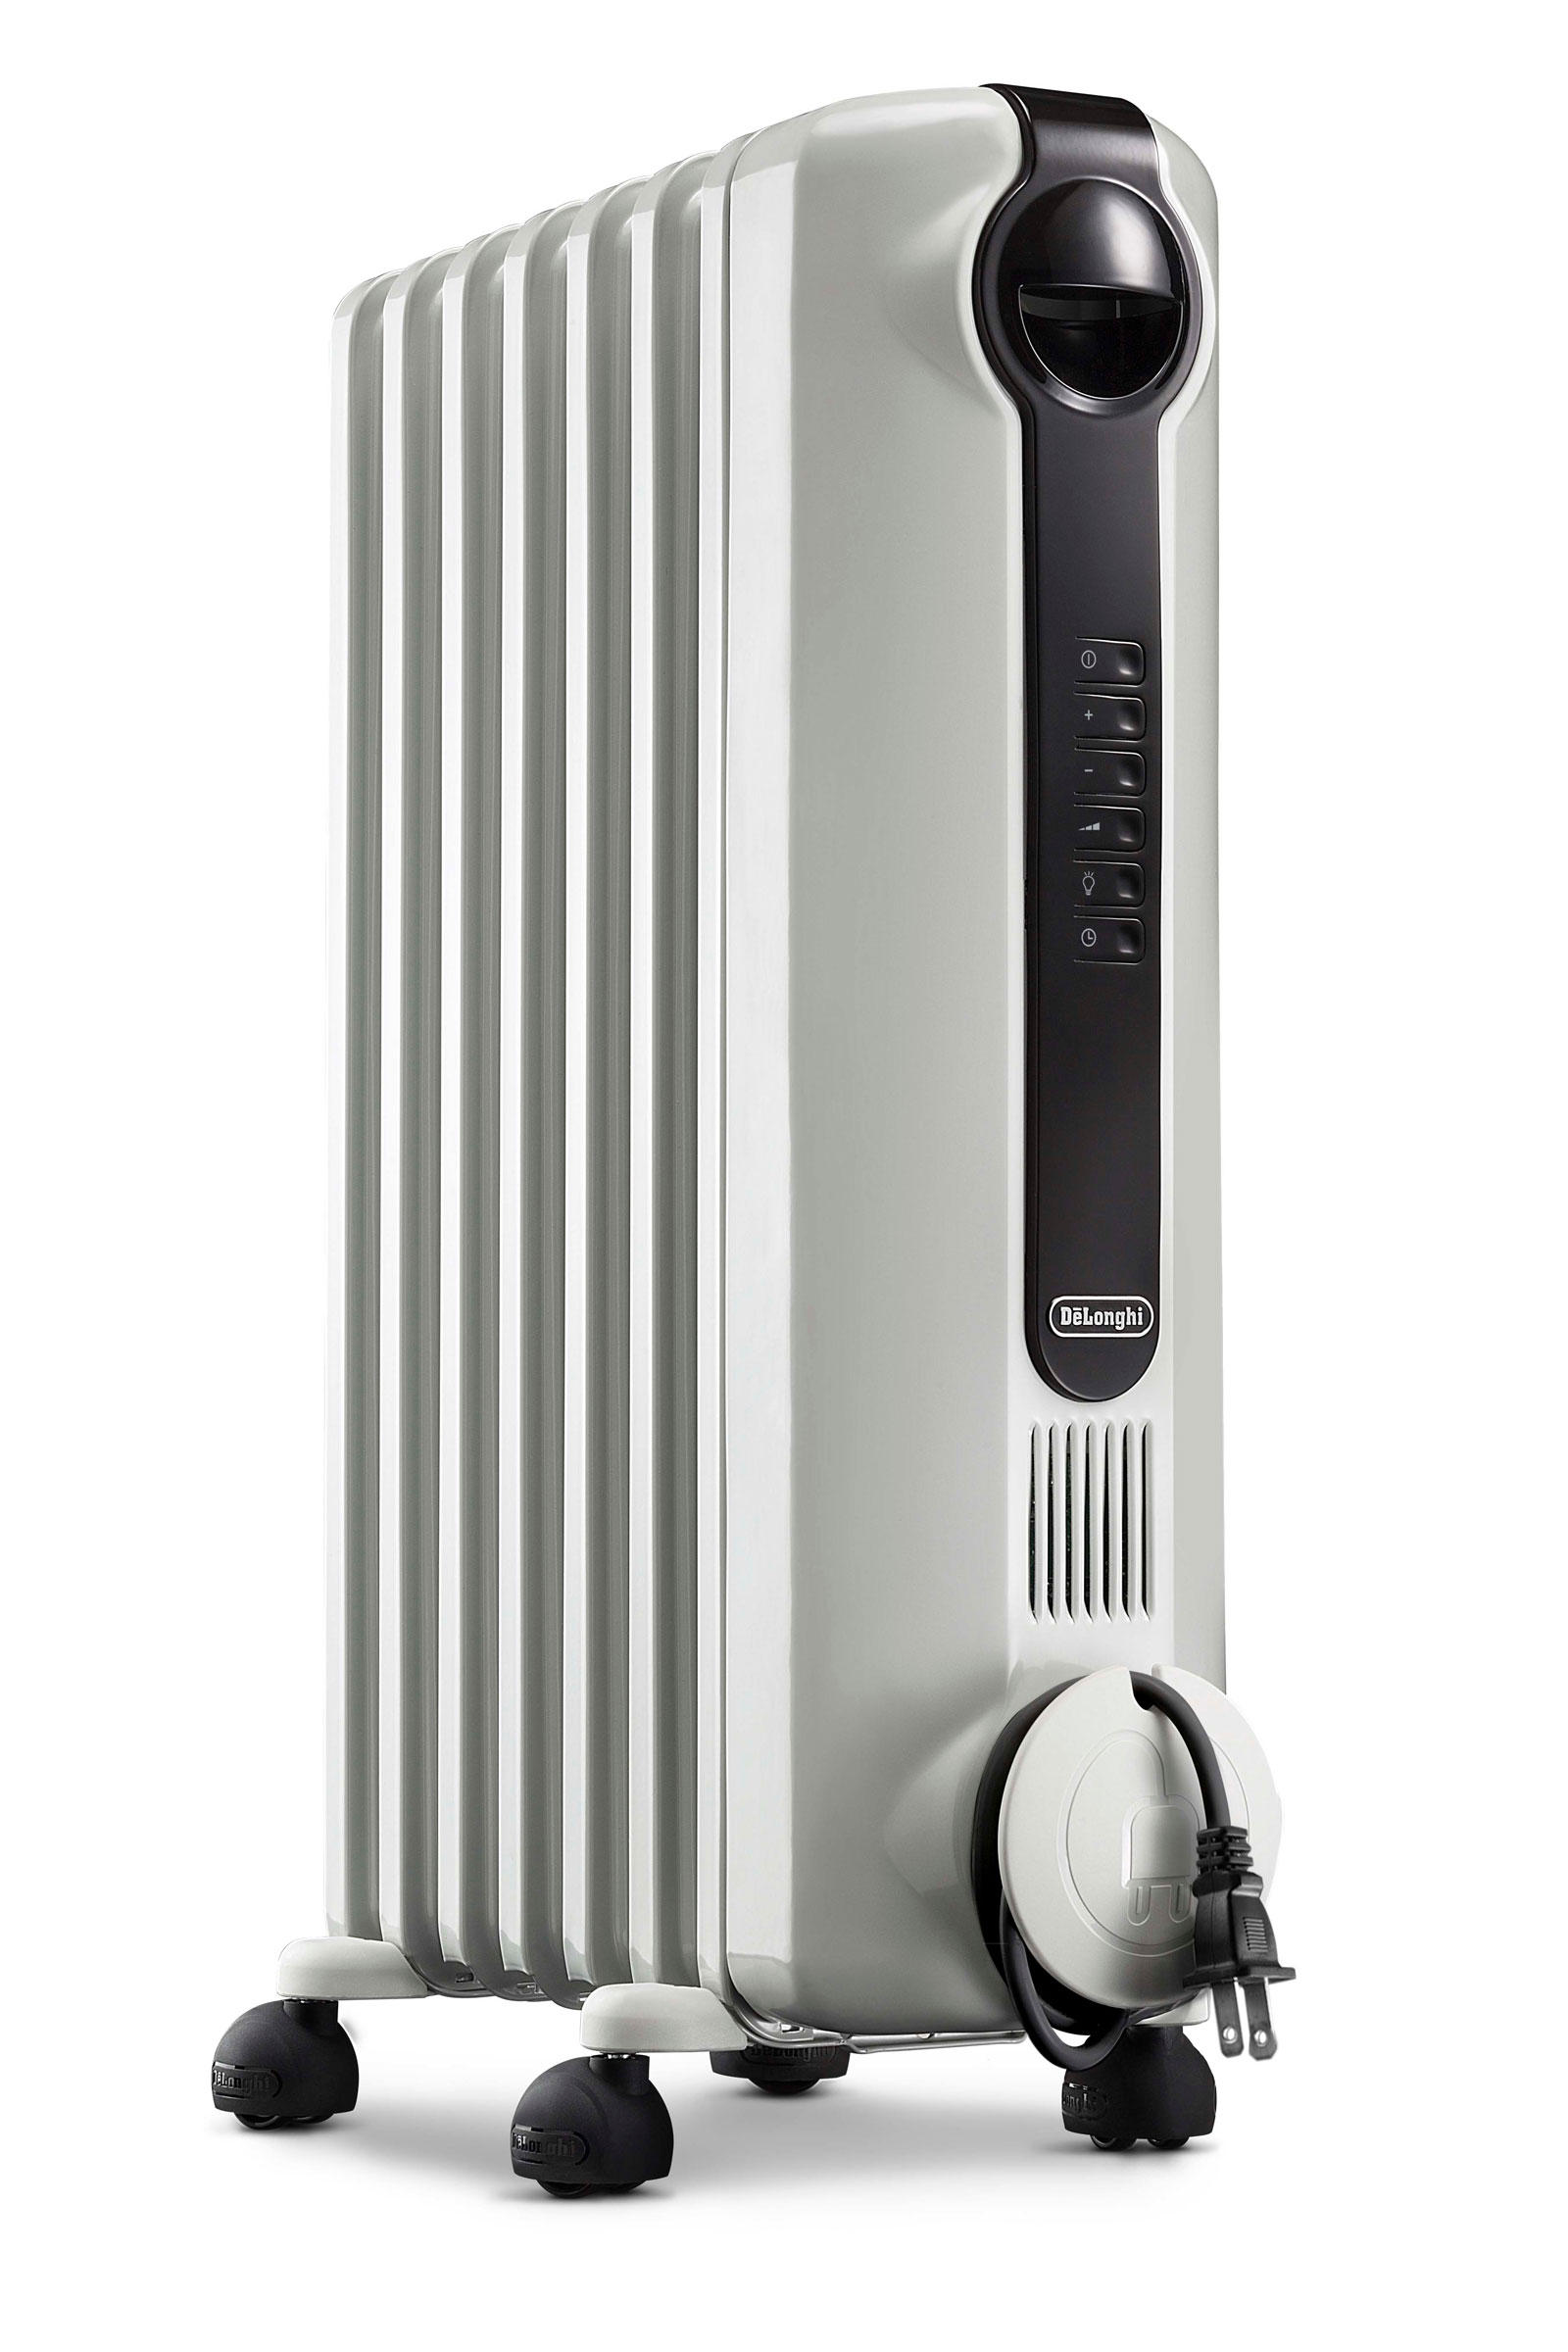 space-heaters-energy-efficient-DeLonghi-Up-to-1500-Watt-Convection-and-Radiant-Tower-Indoor-Electric-Space-Heater-with-Thermostat